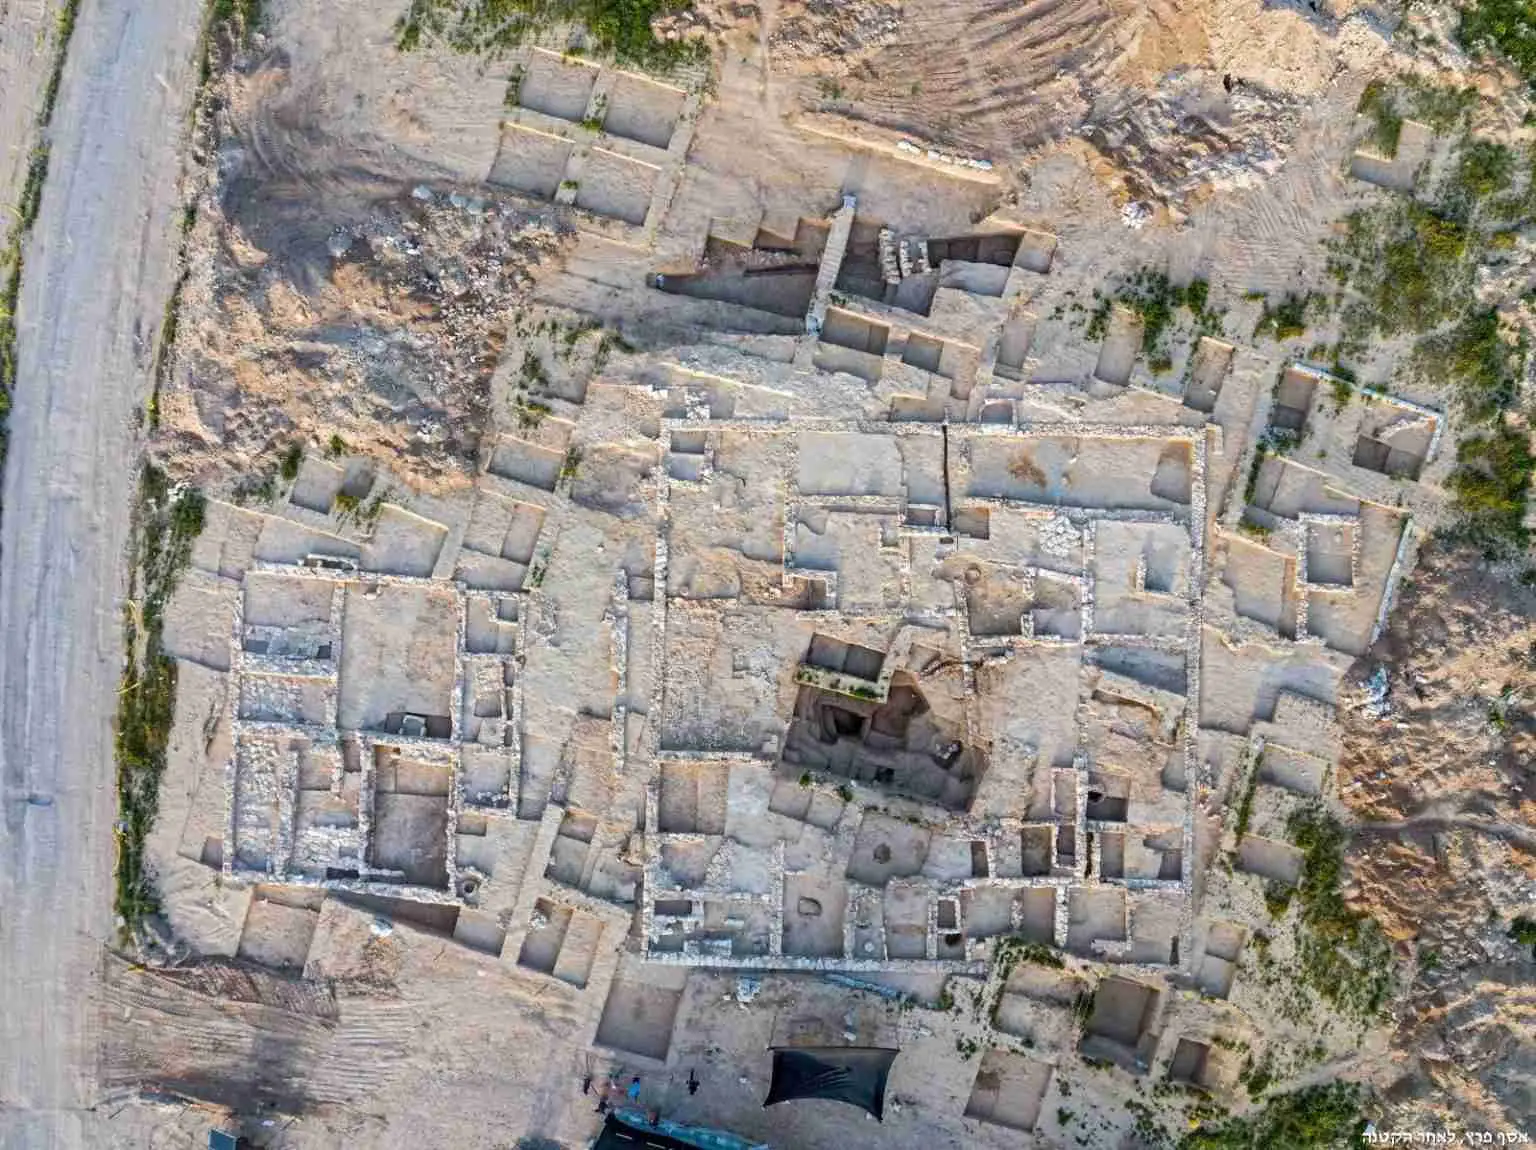 An Ancient Mosque is Unearthed by Archaeologists in Israel